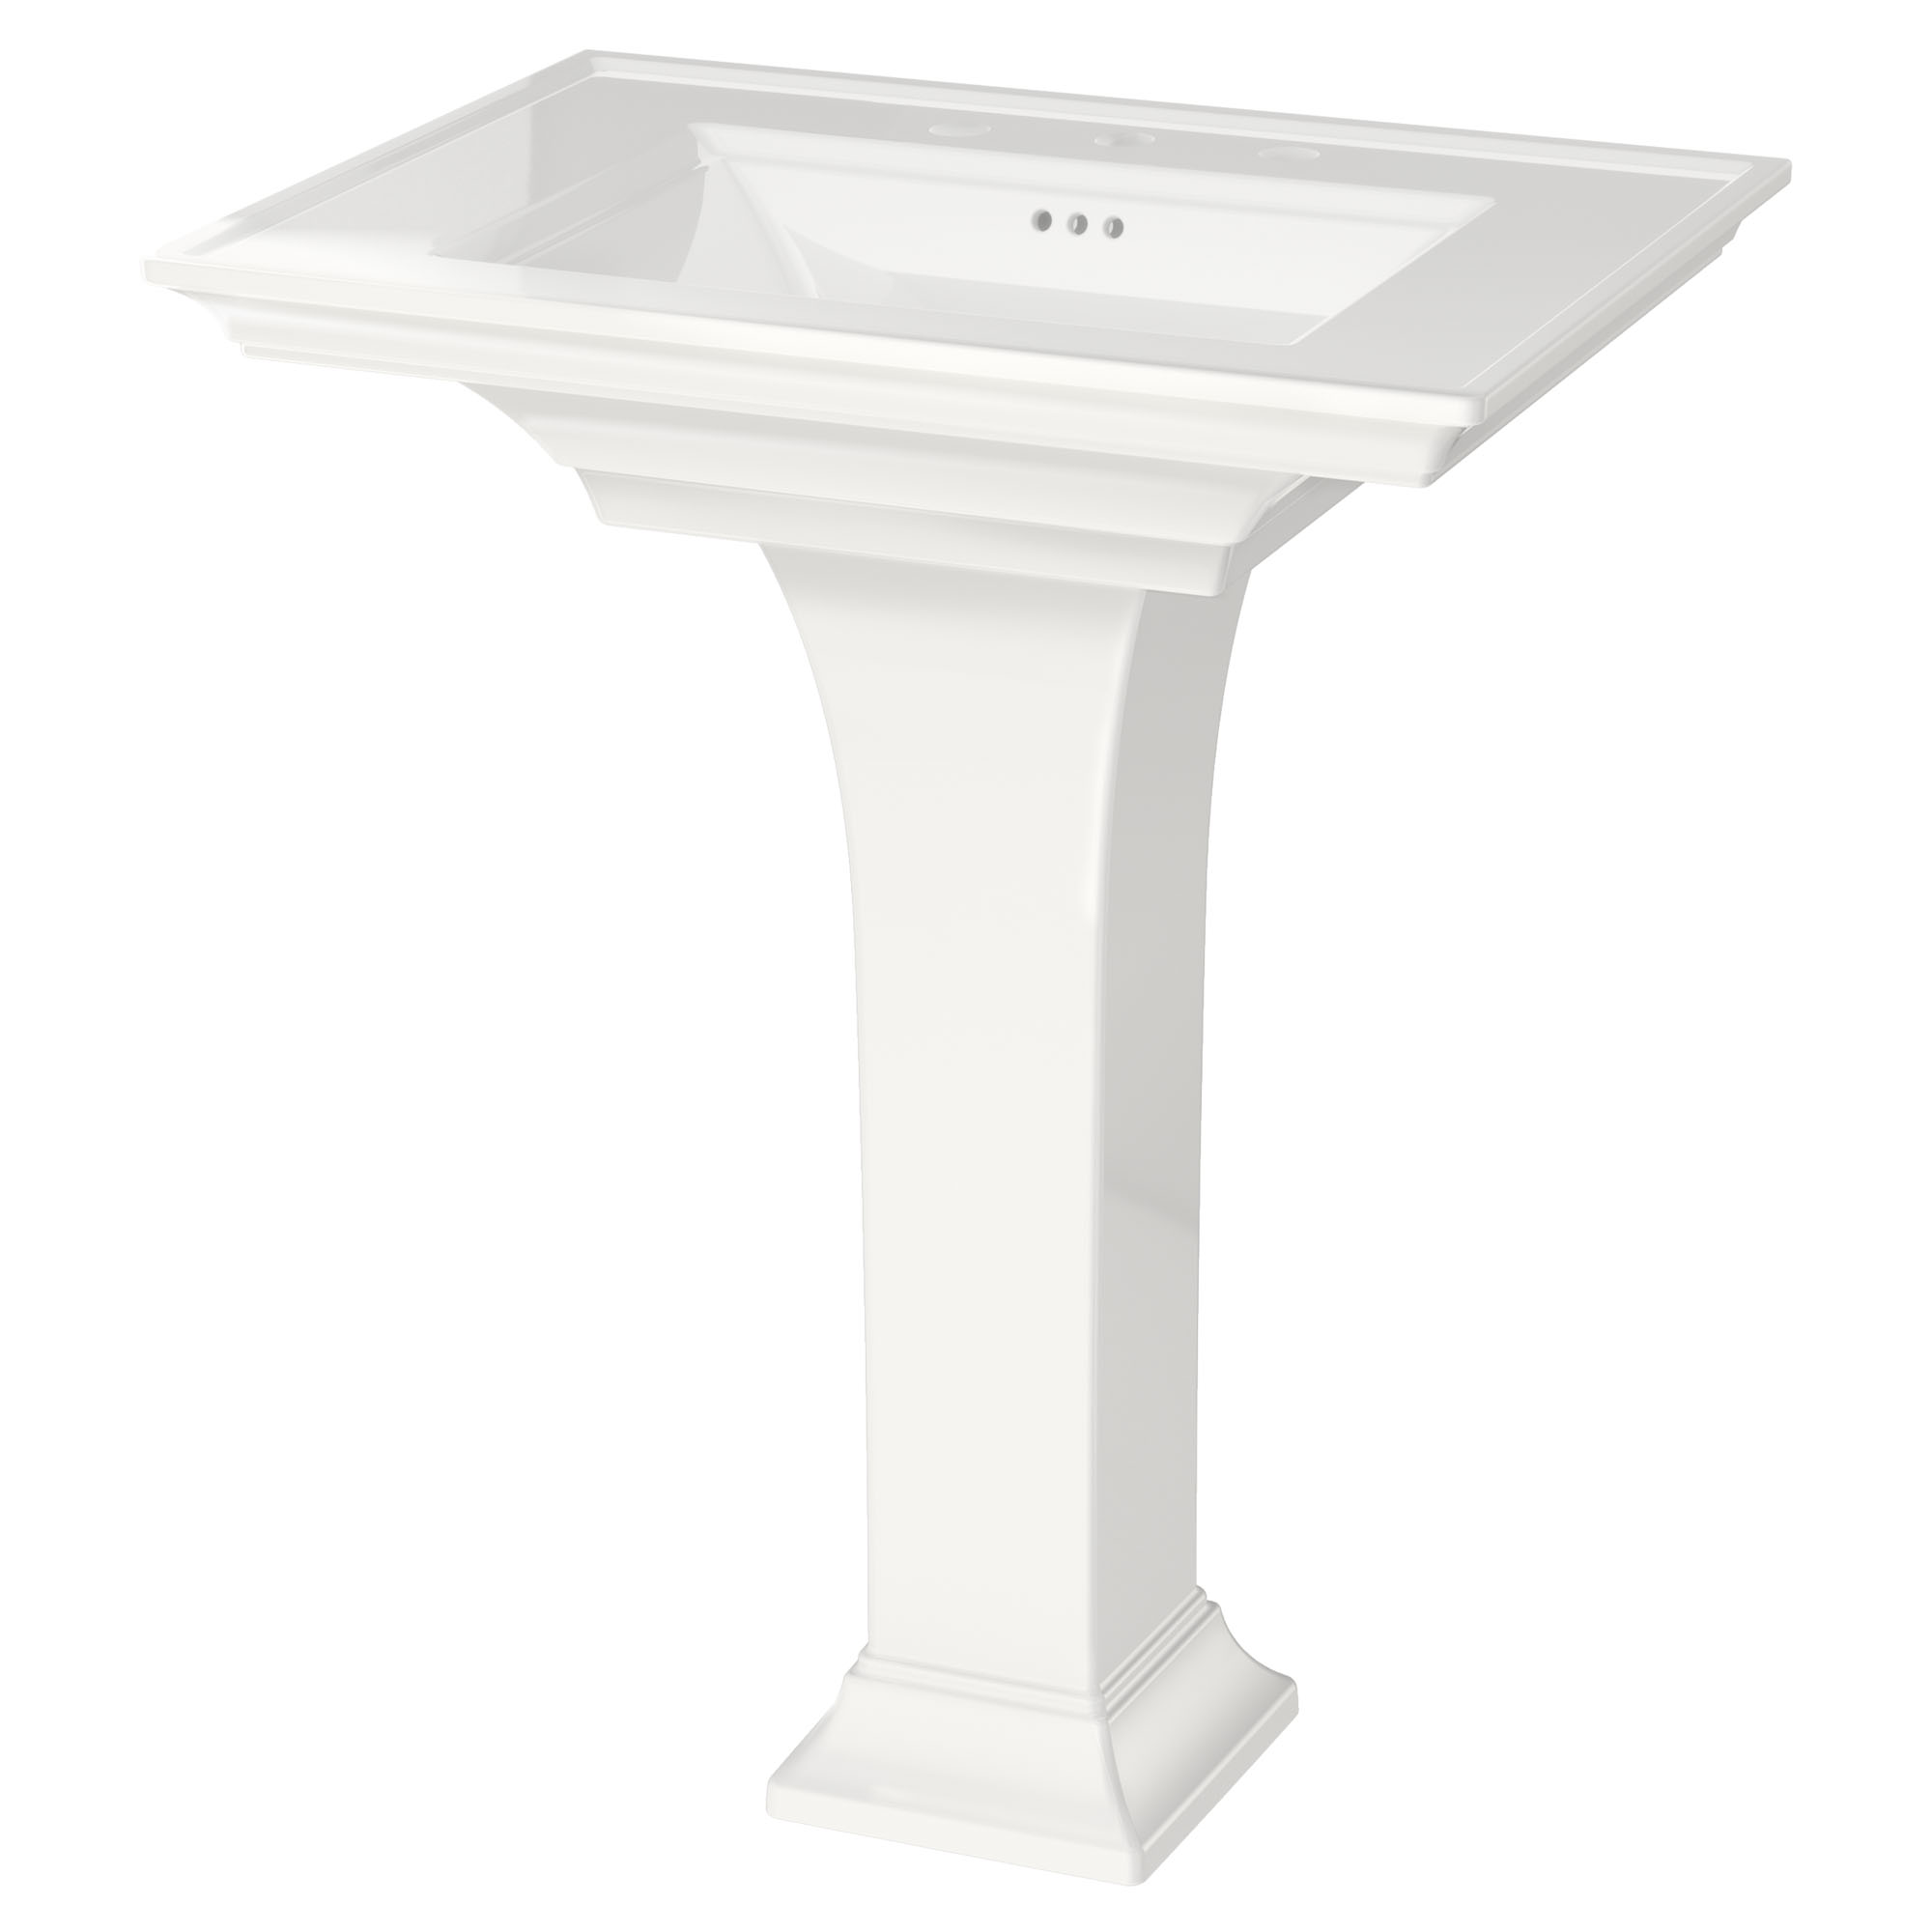 Town Square™ S 8-Inch Widespread Pedestal Sink Top and Leg Combination